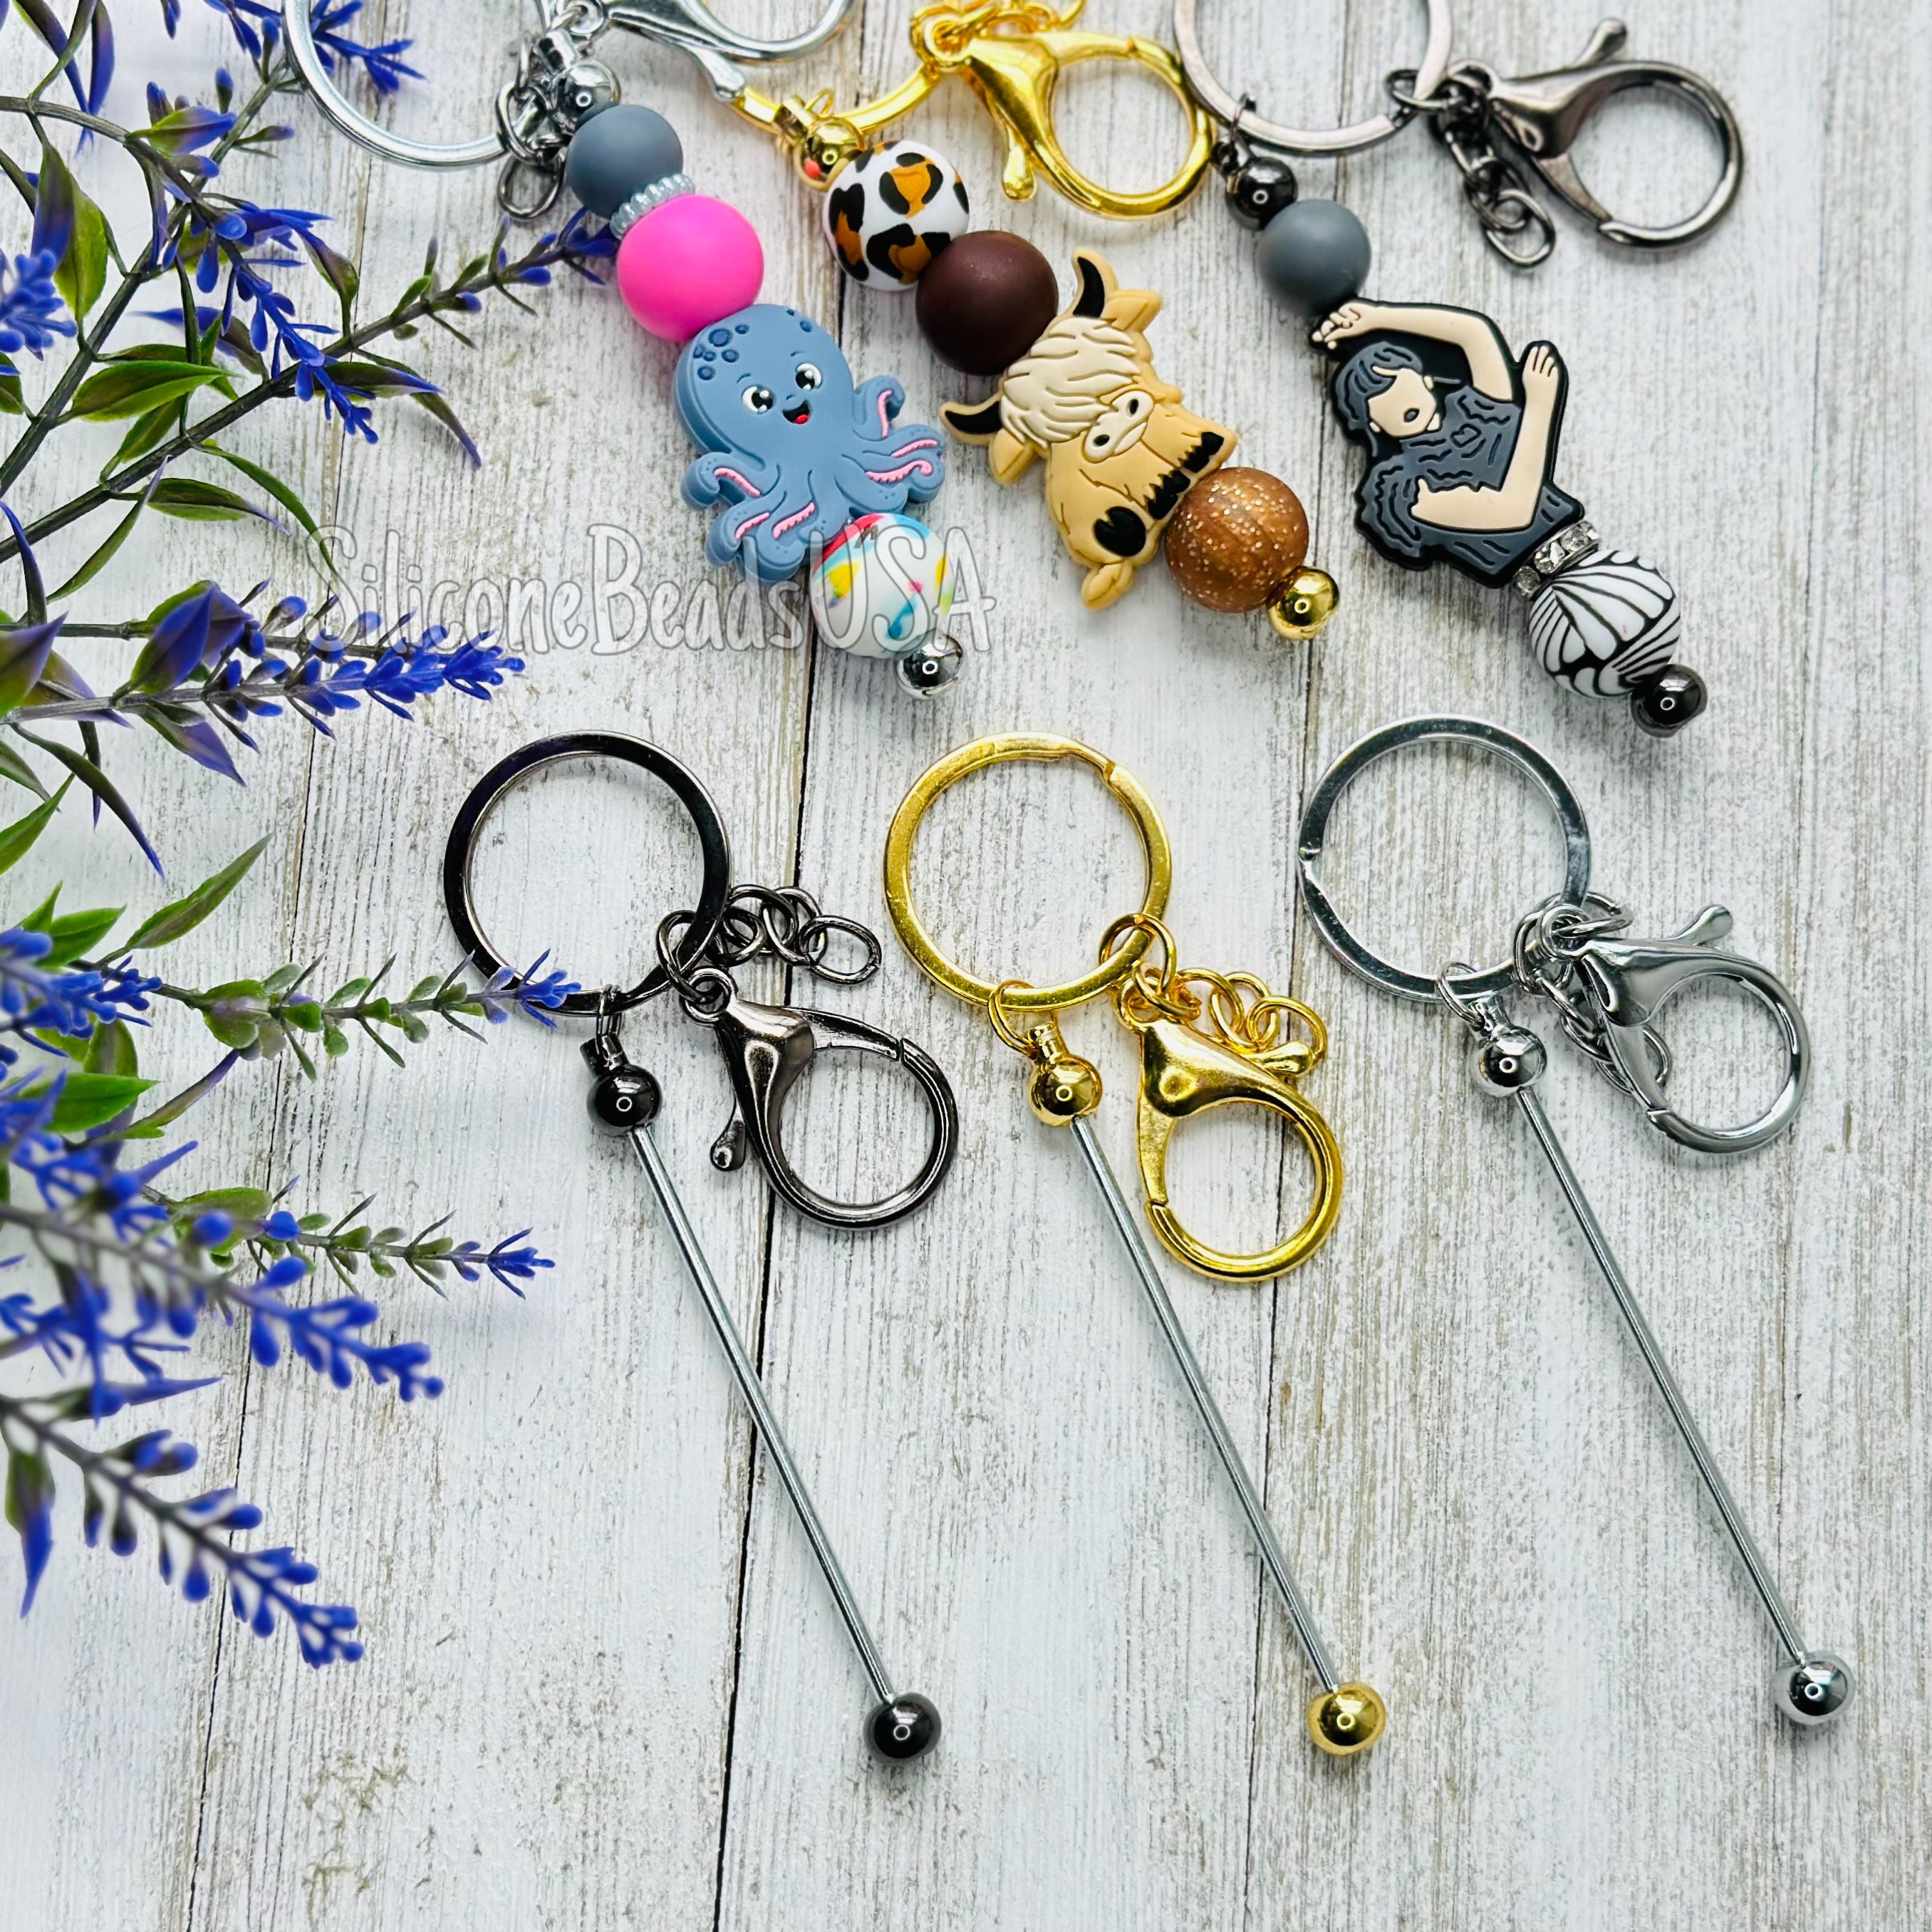 Silver Key Chain Rings Kit Keychain Rings Chain Gold Keychain Rings Set for  Crafts Black Key Rings Split Key Rings With Open Jump Ring 